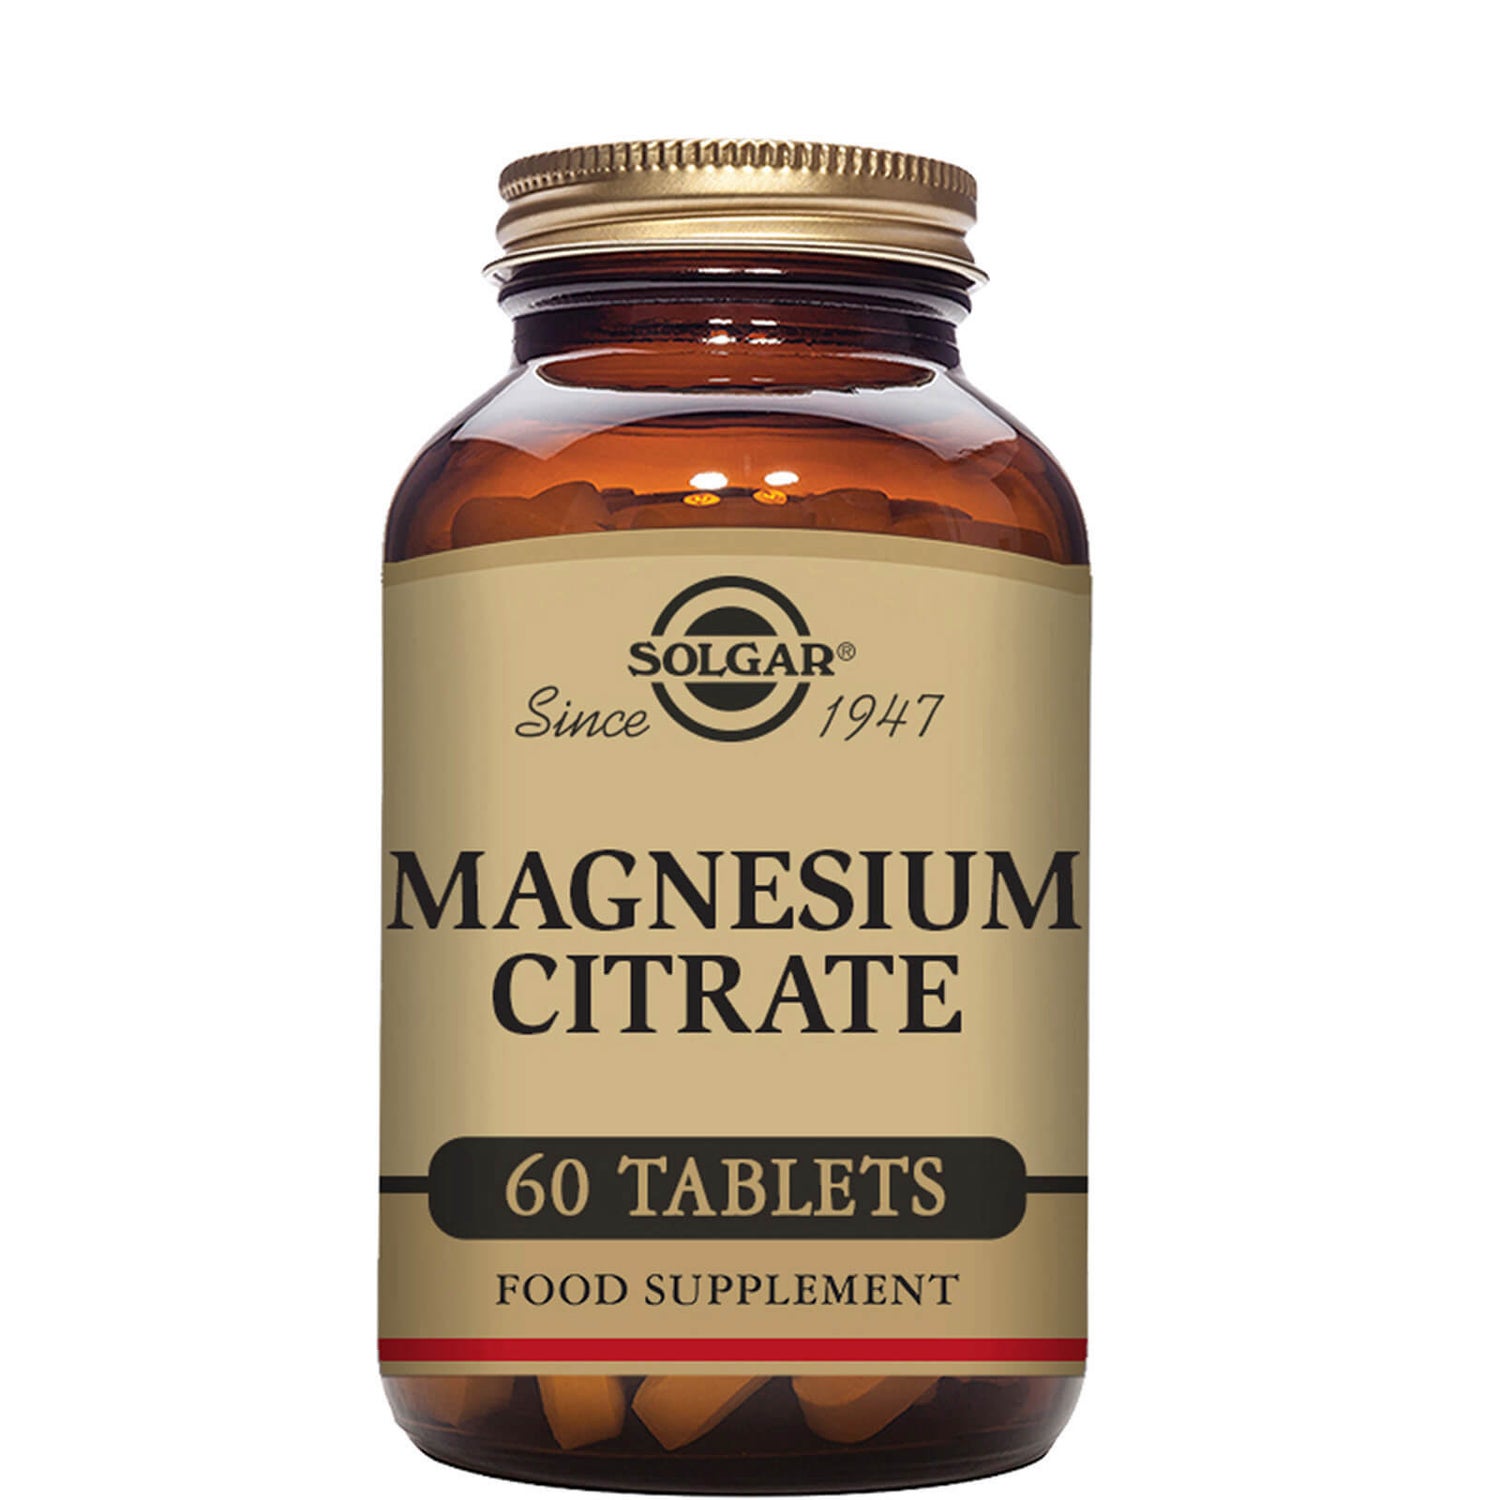 Solgar Magnesium Citrate Tablets - Pack of 60